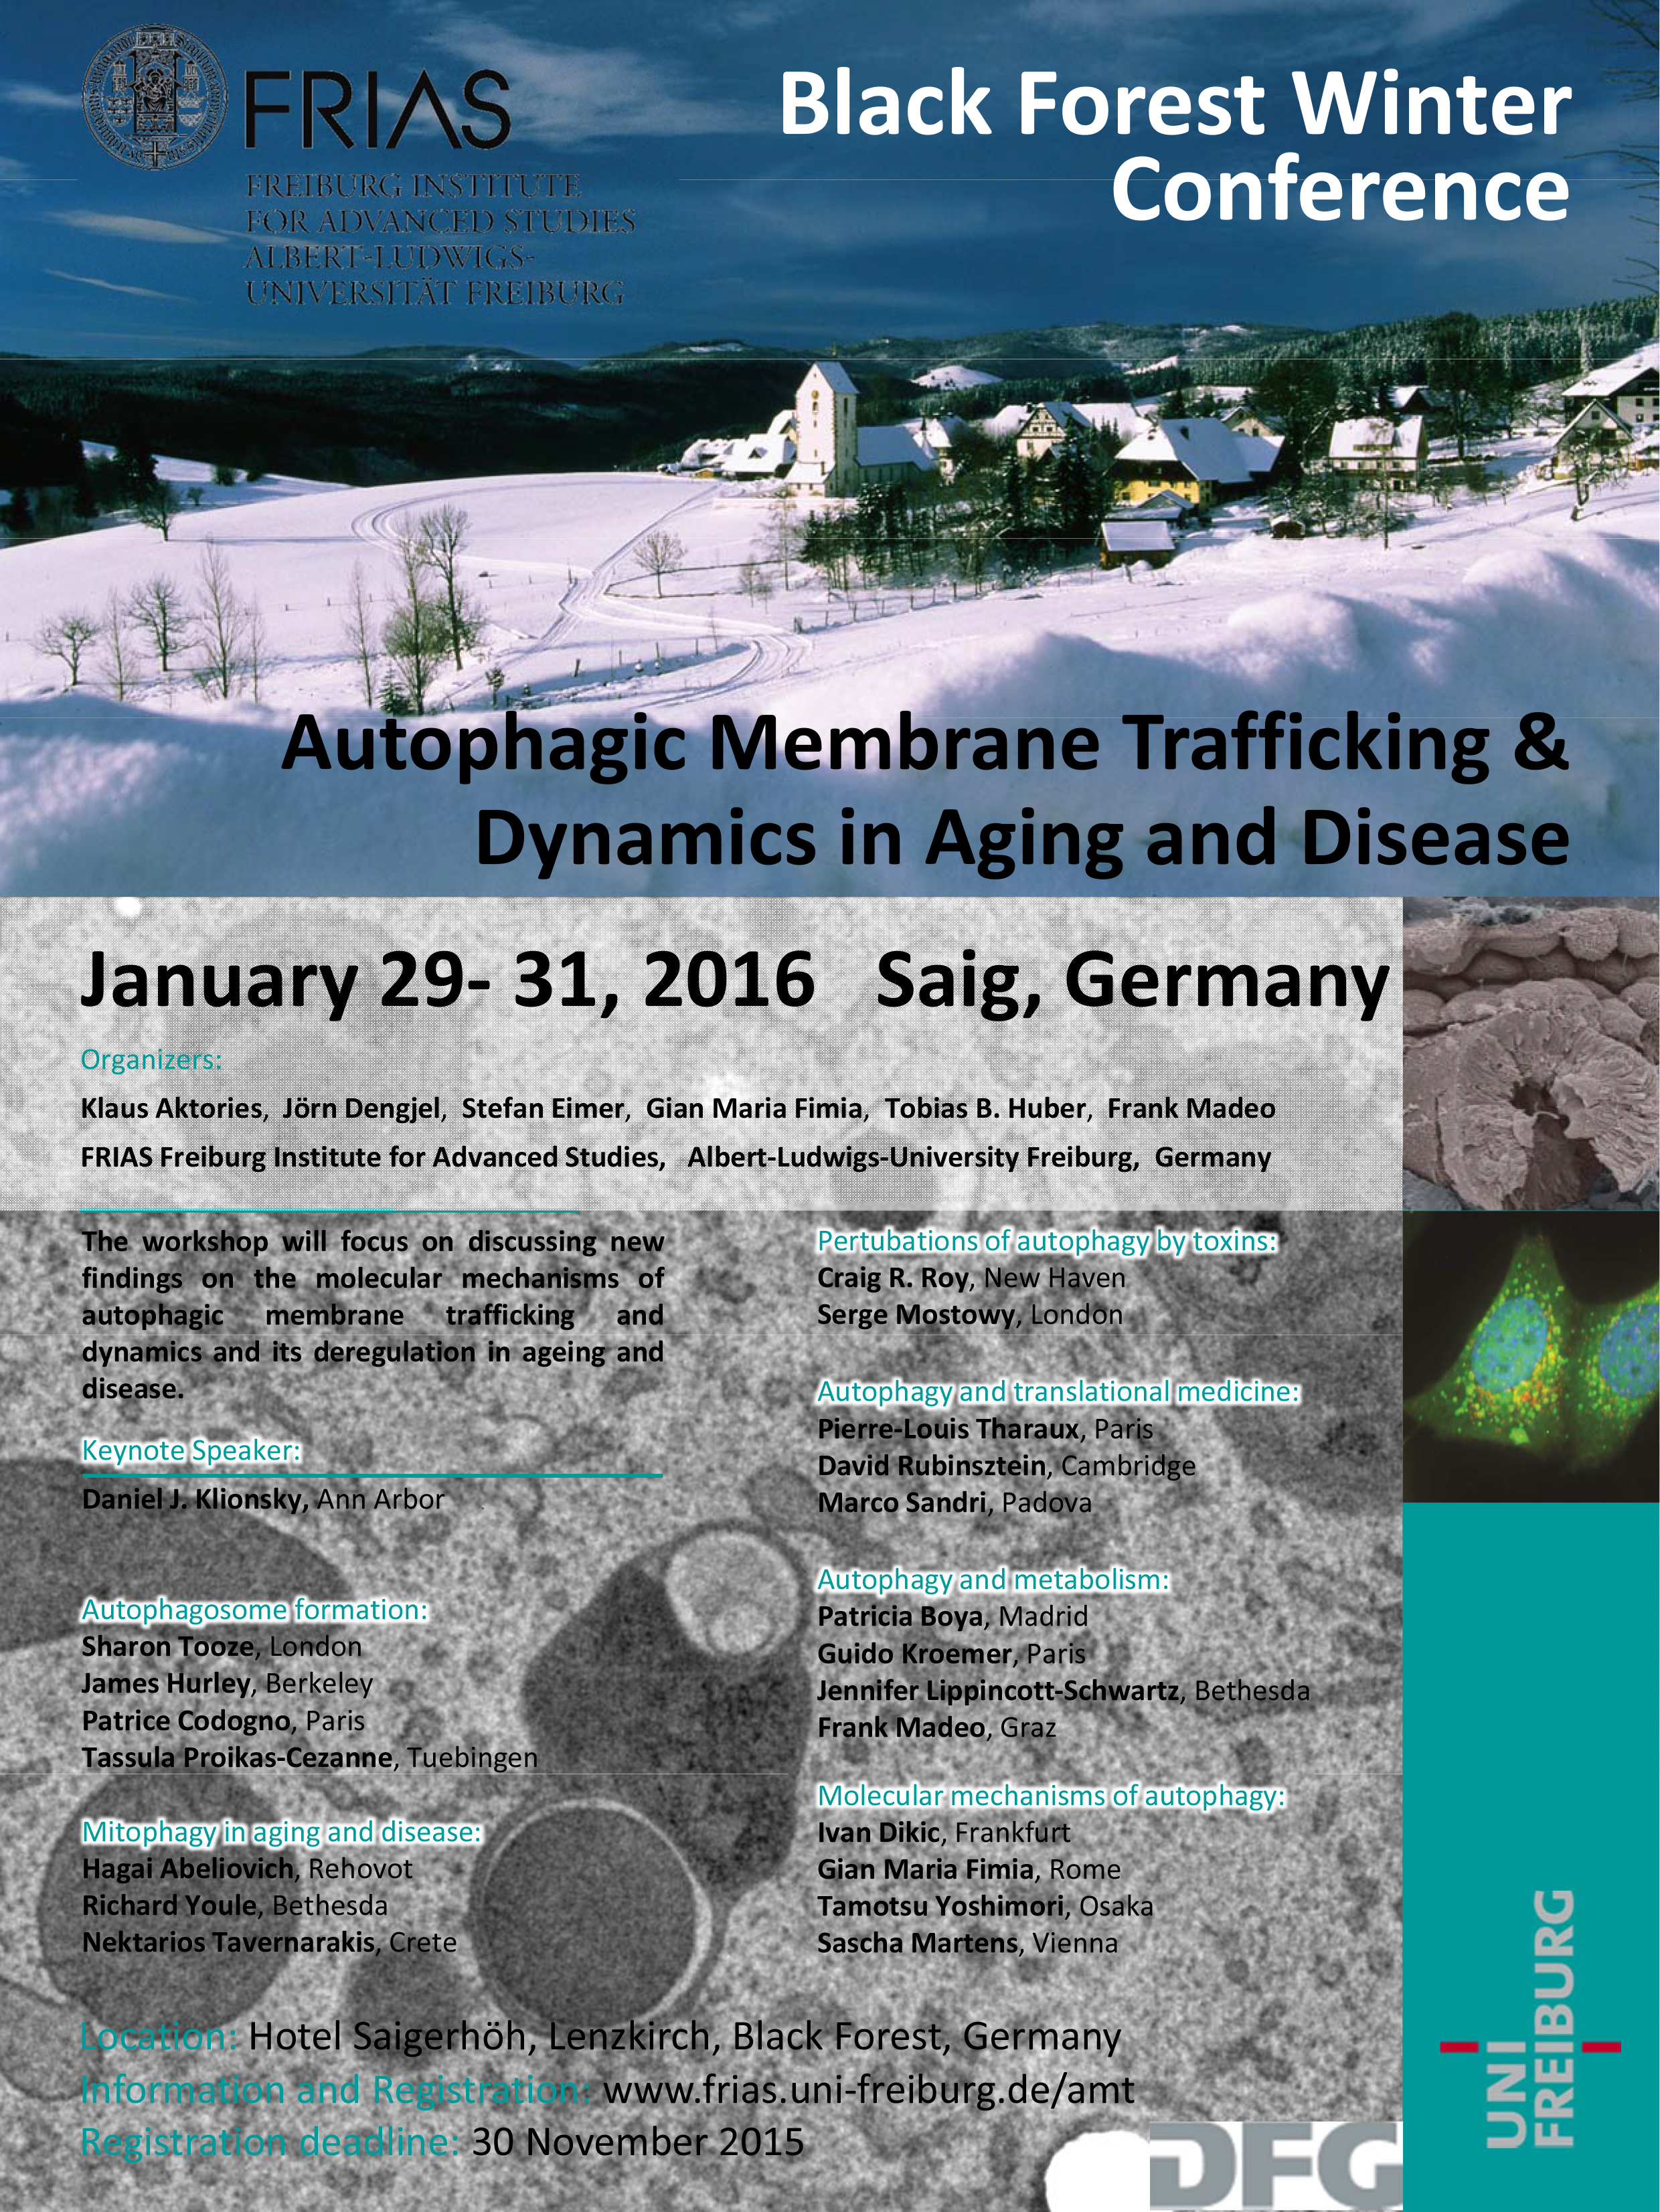 FRIAS-Fellows organize first international meeting on autophagy in Germany